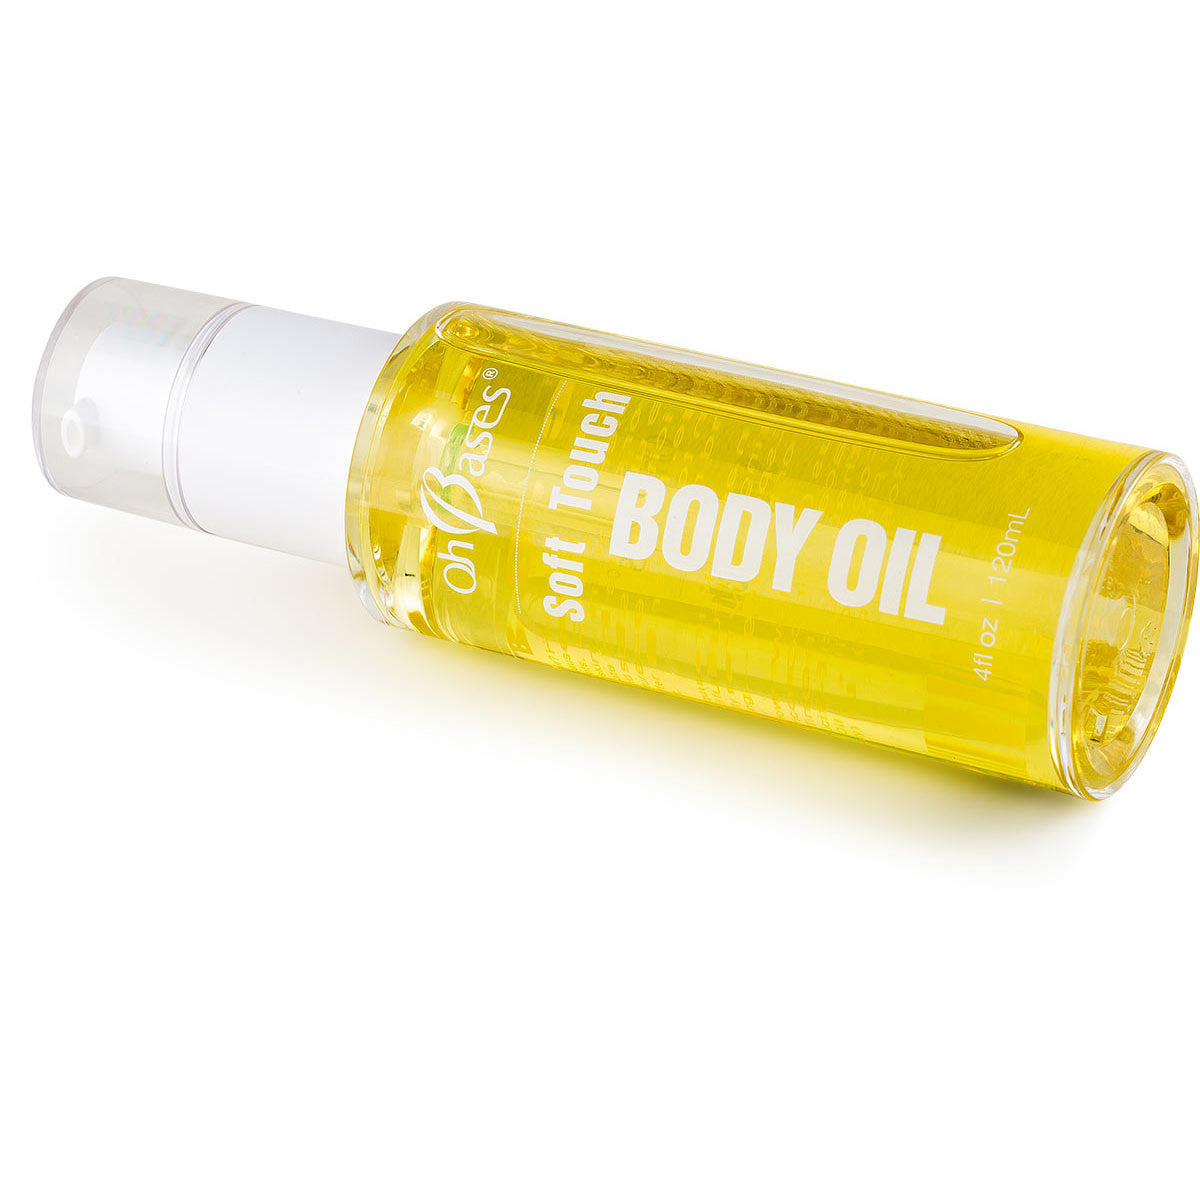 Soft Touch Body Oil - OhBases